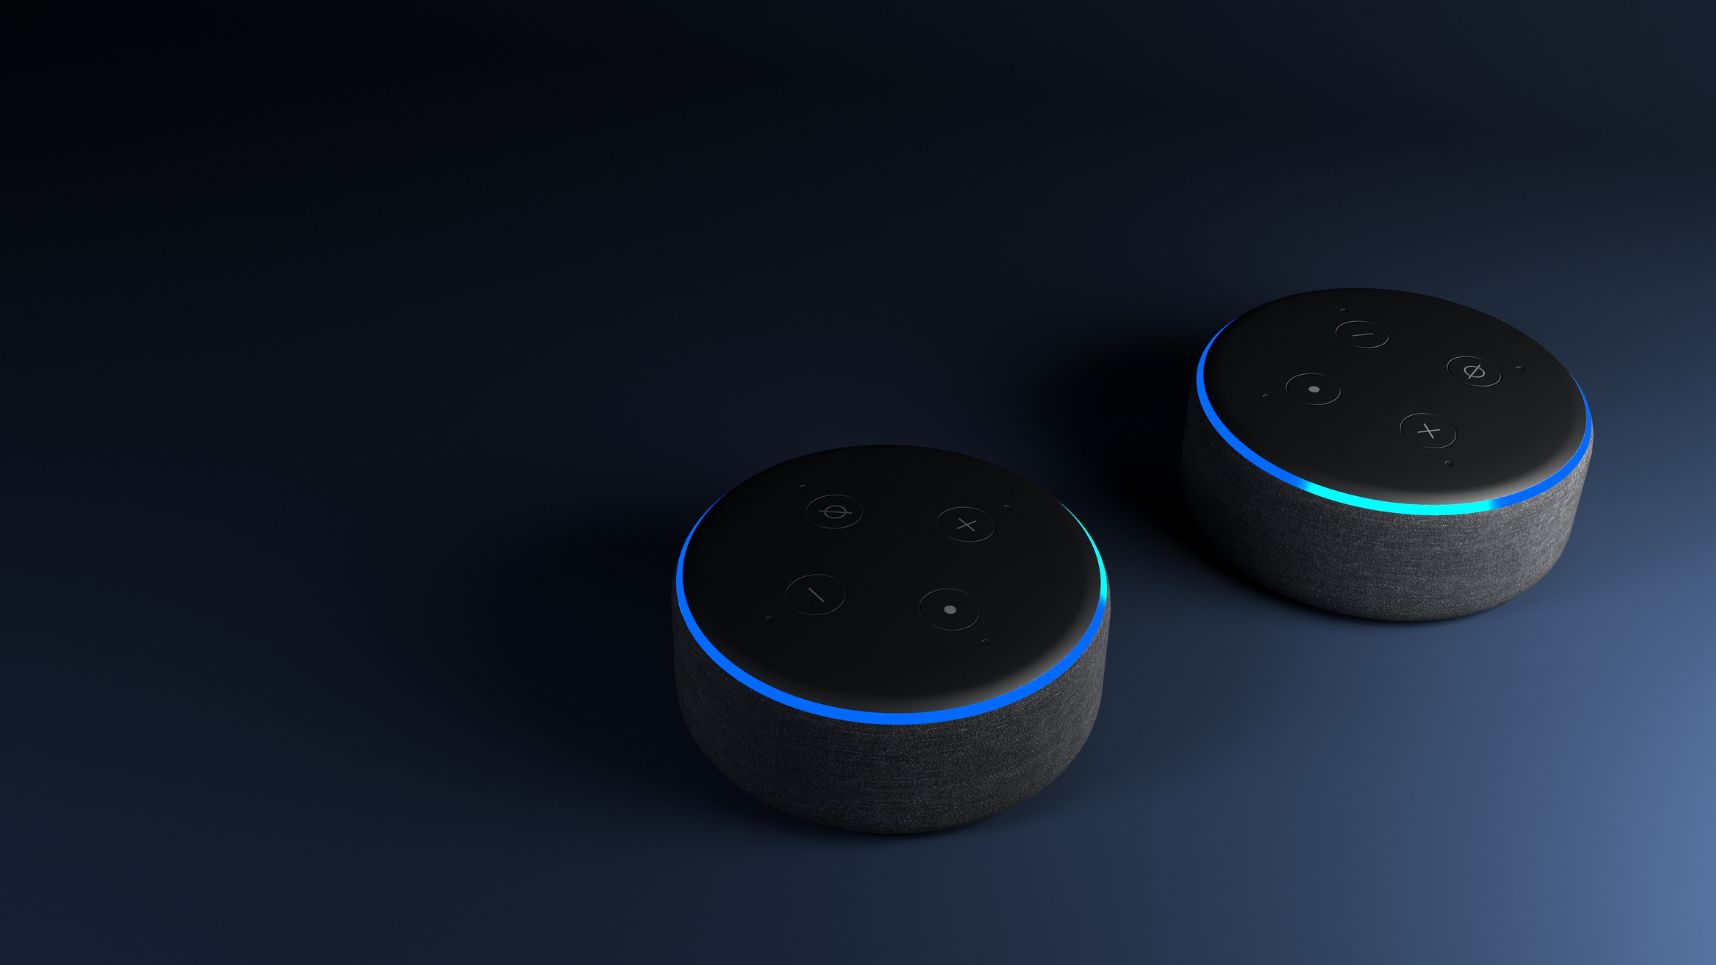 to pay $30 million for Alexa and Ring privacy breaches